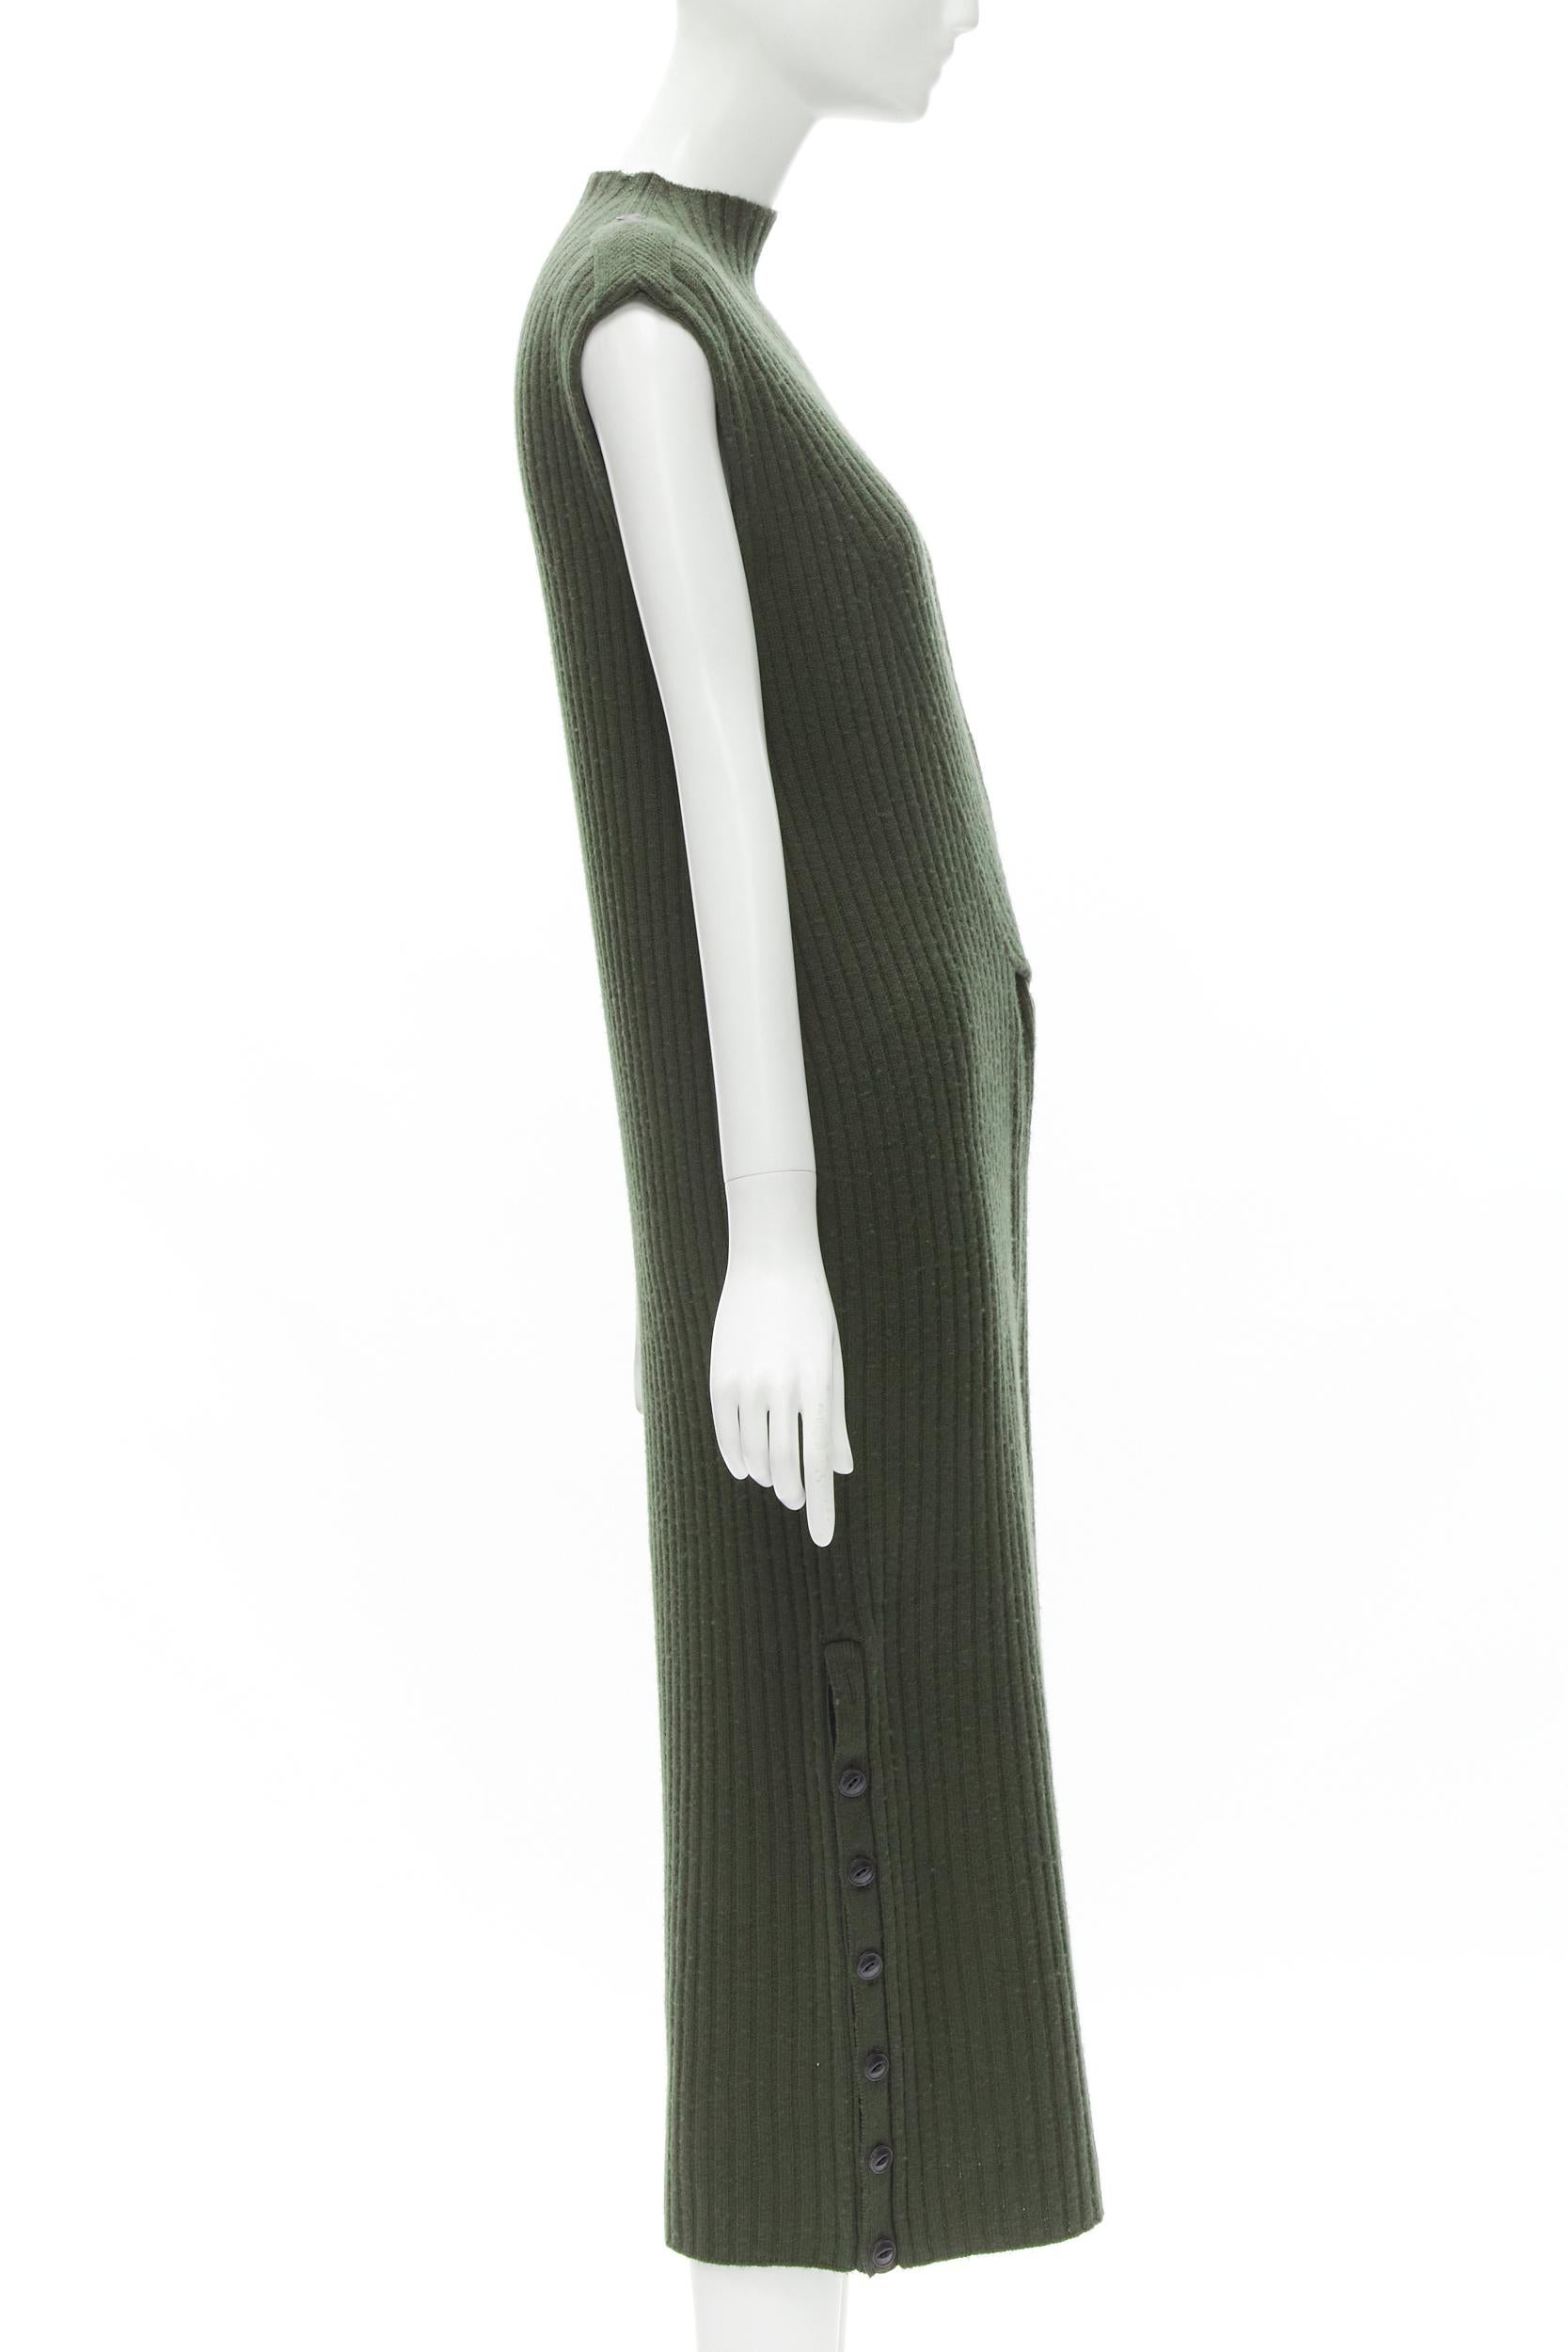 RAG & BONE 100% merino wool braid detail ribbed button side sweater dress S In Excellent Condition For Sale In Hong Kong, NT